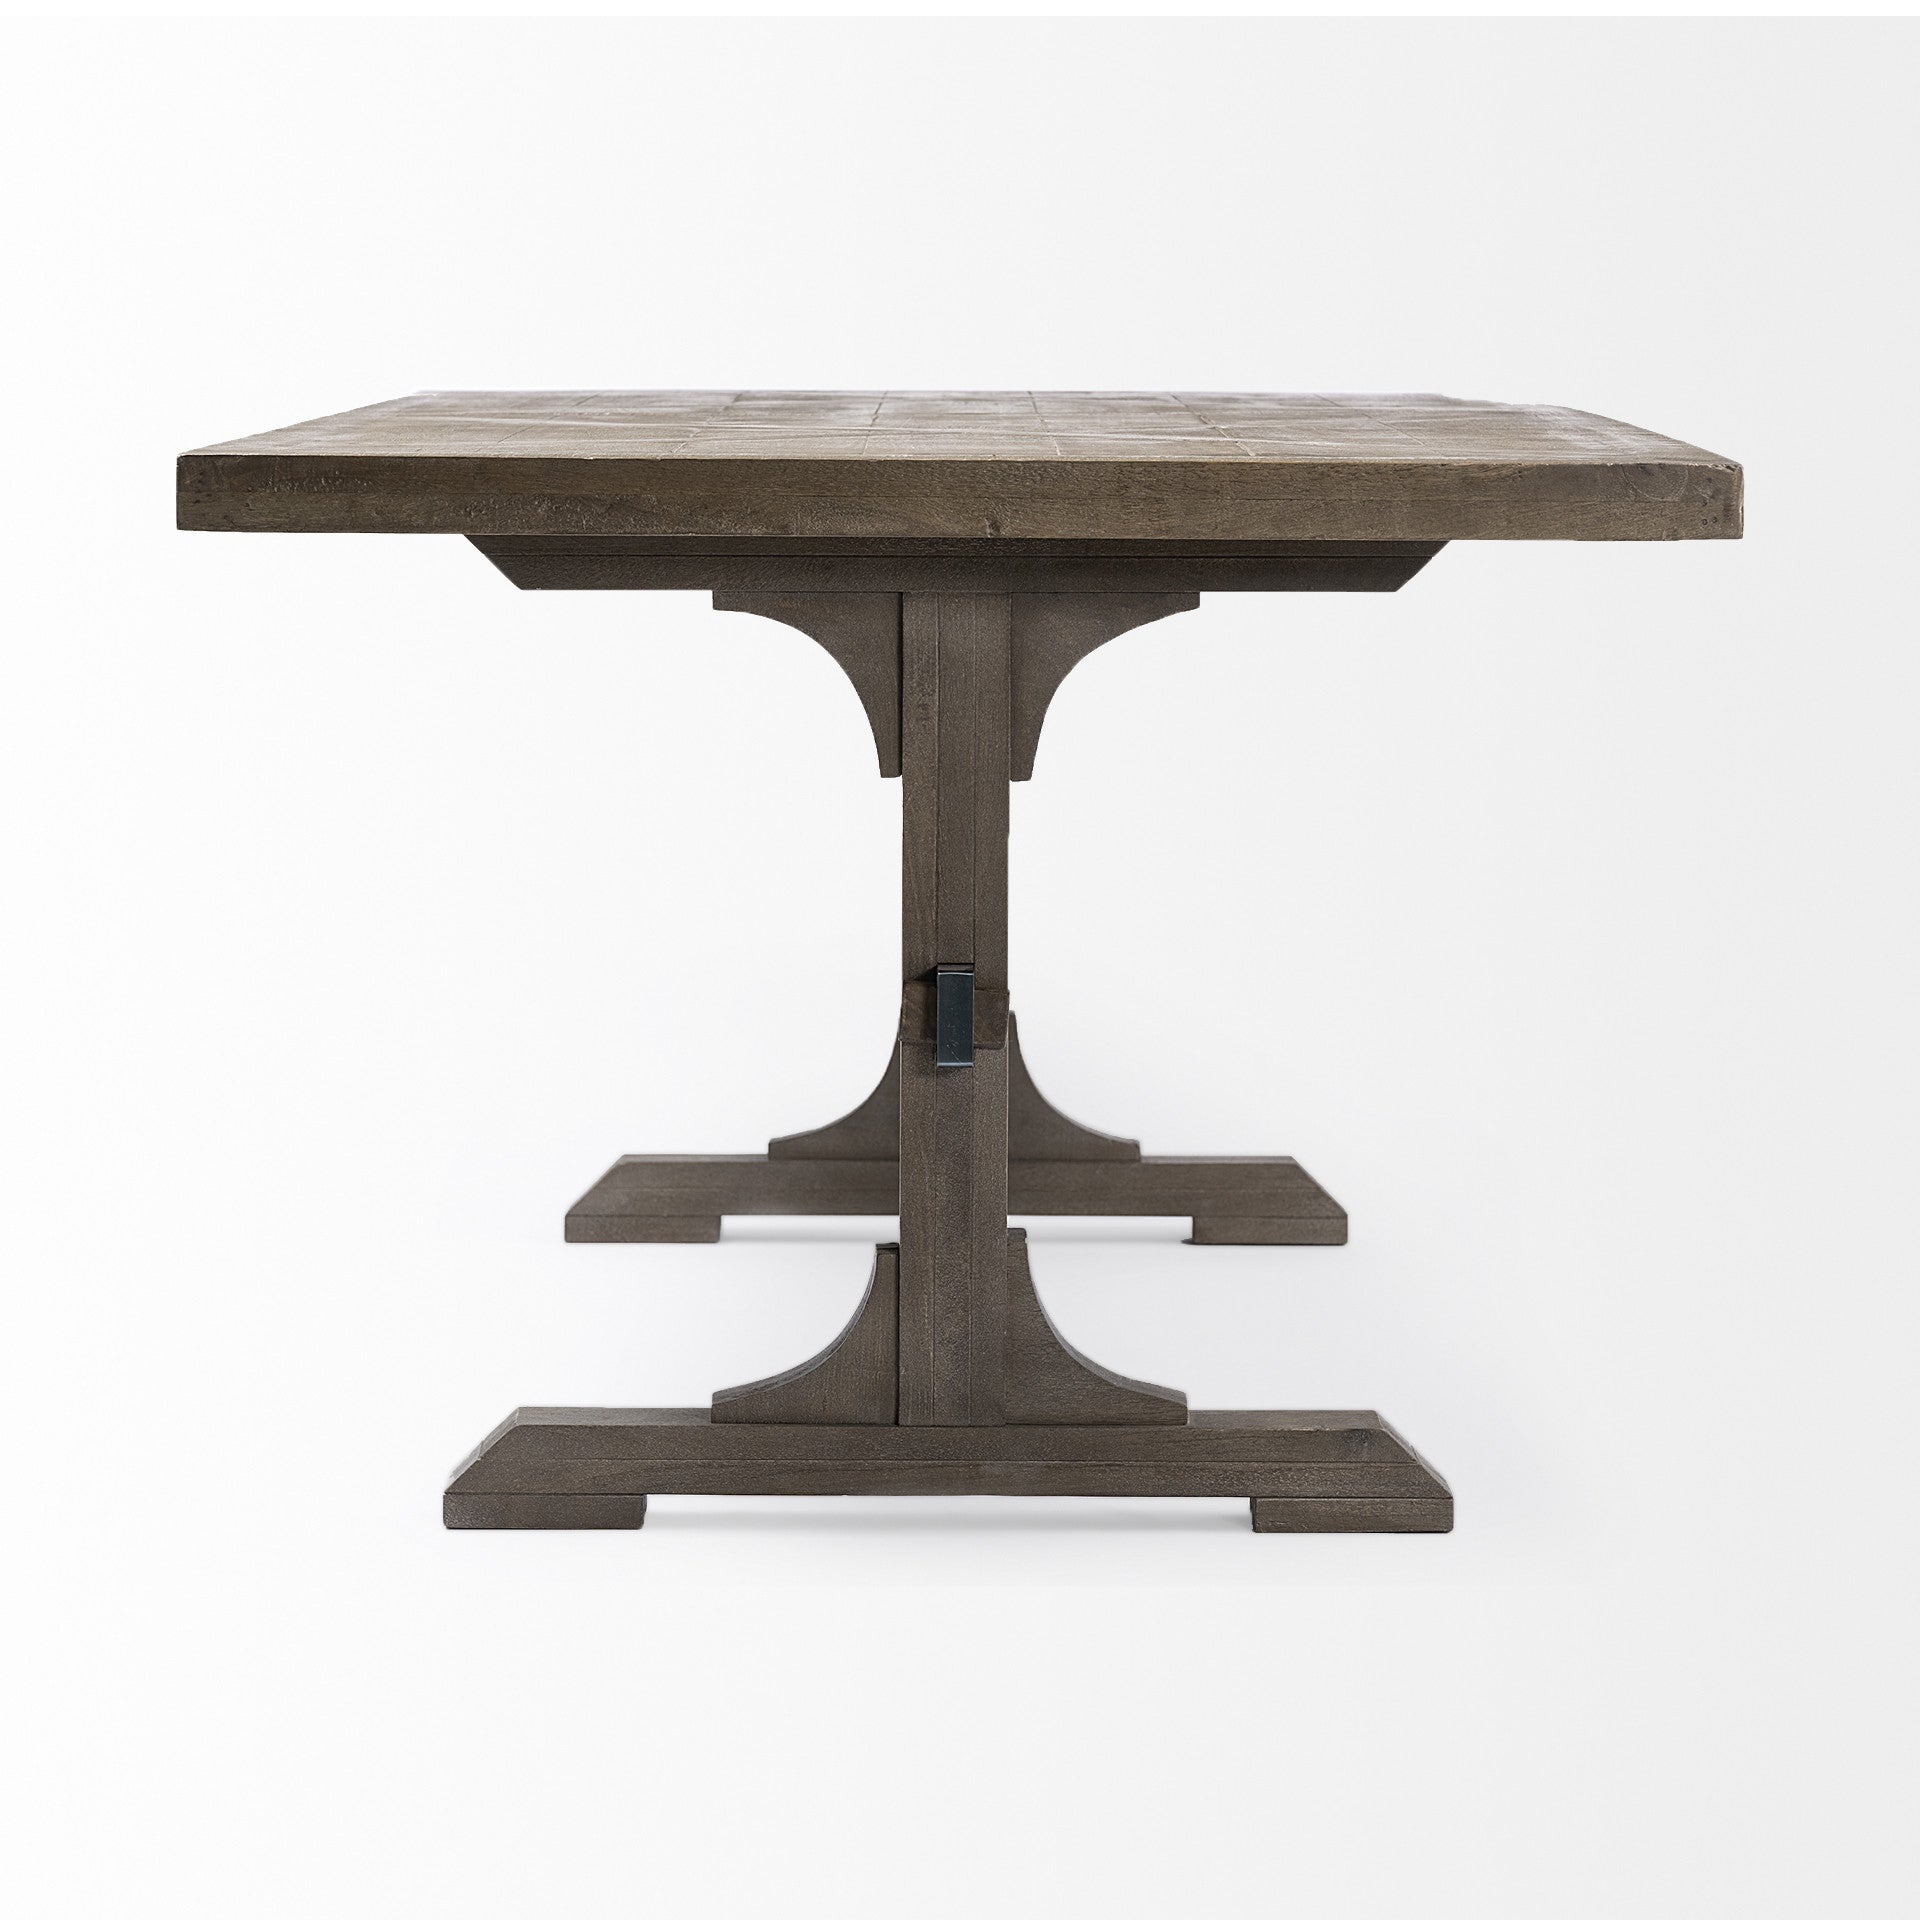 84X40 Grey Solid Wood Top And Base Dining Table